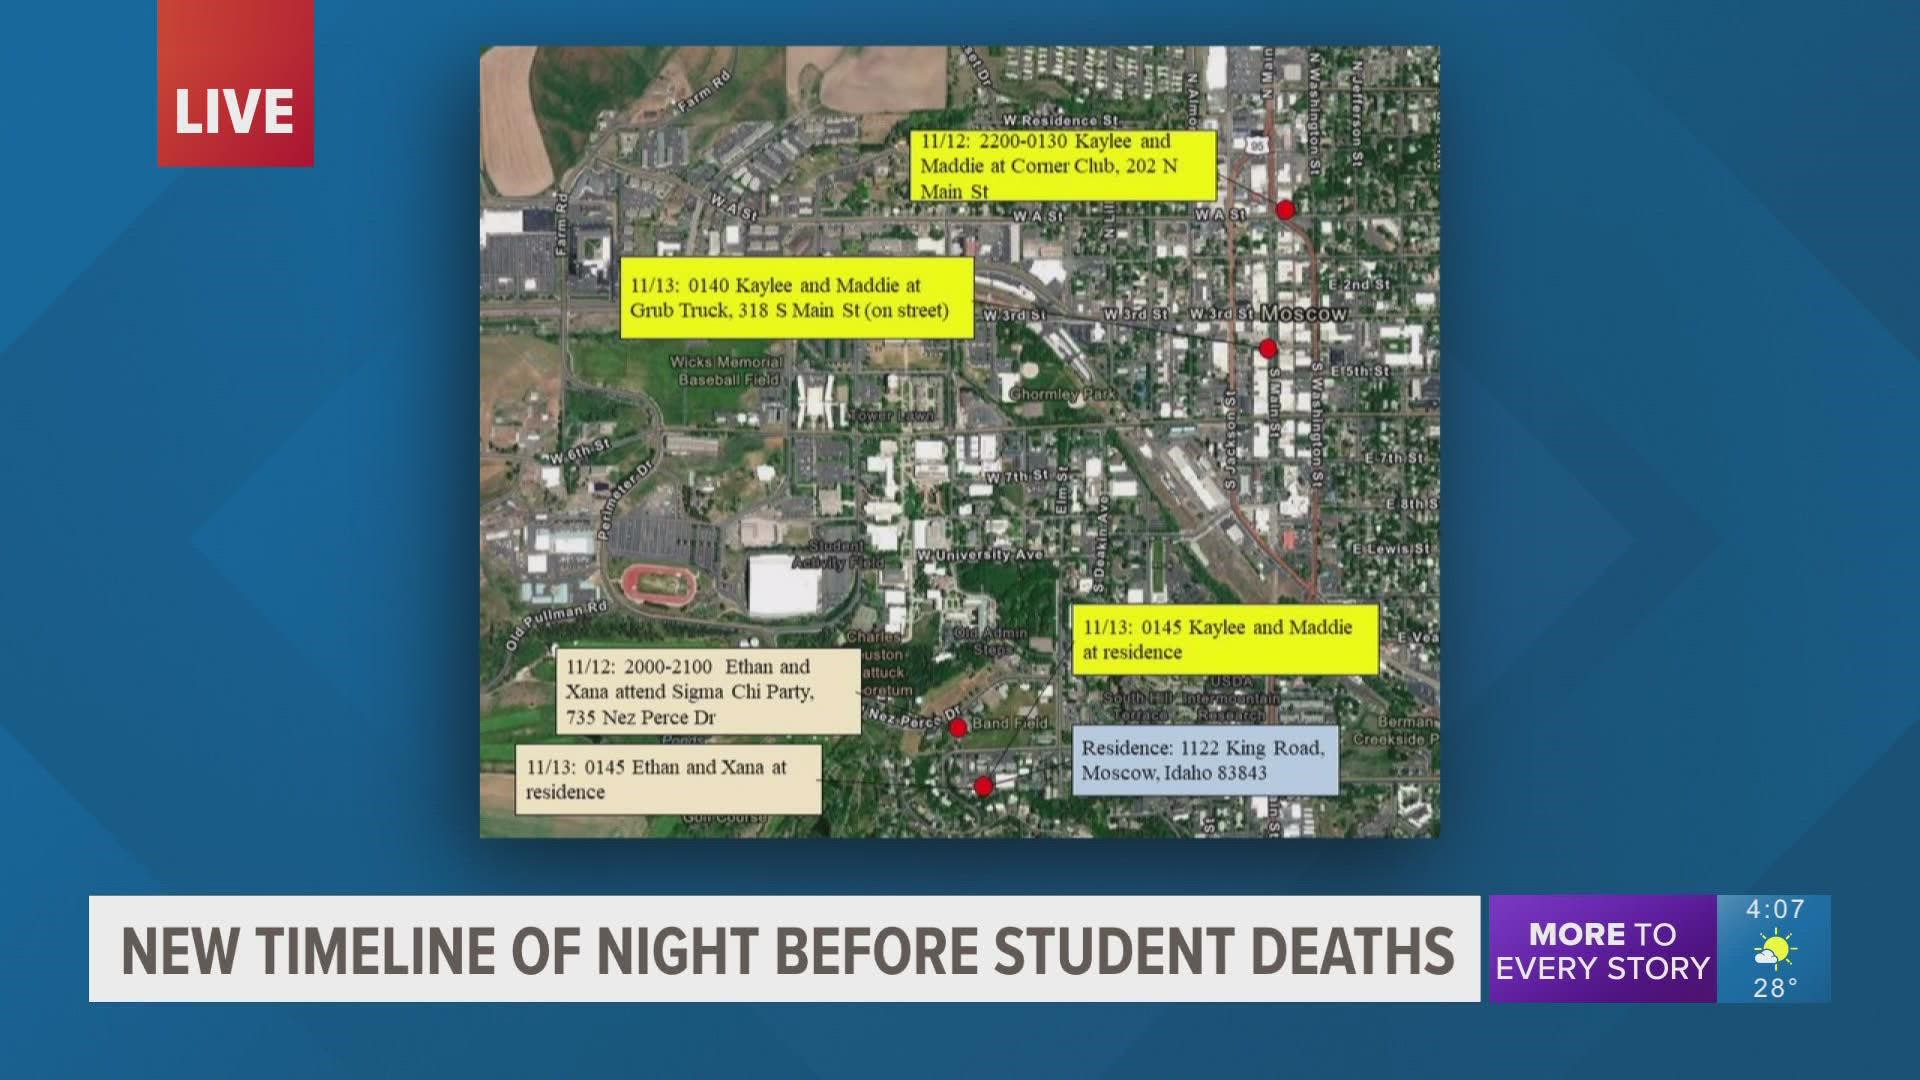 The timeline shows the last places the four students visited before their deaths.